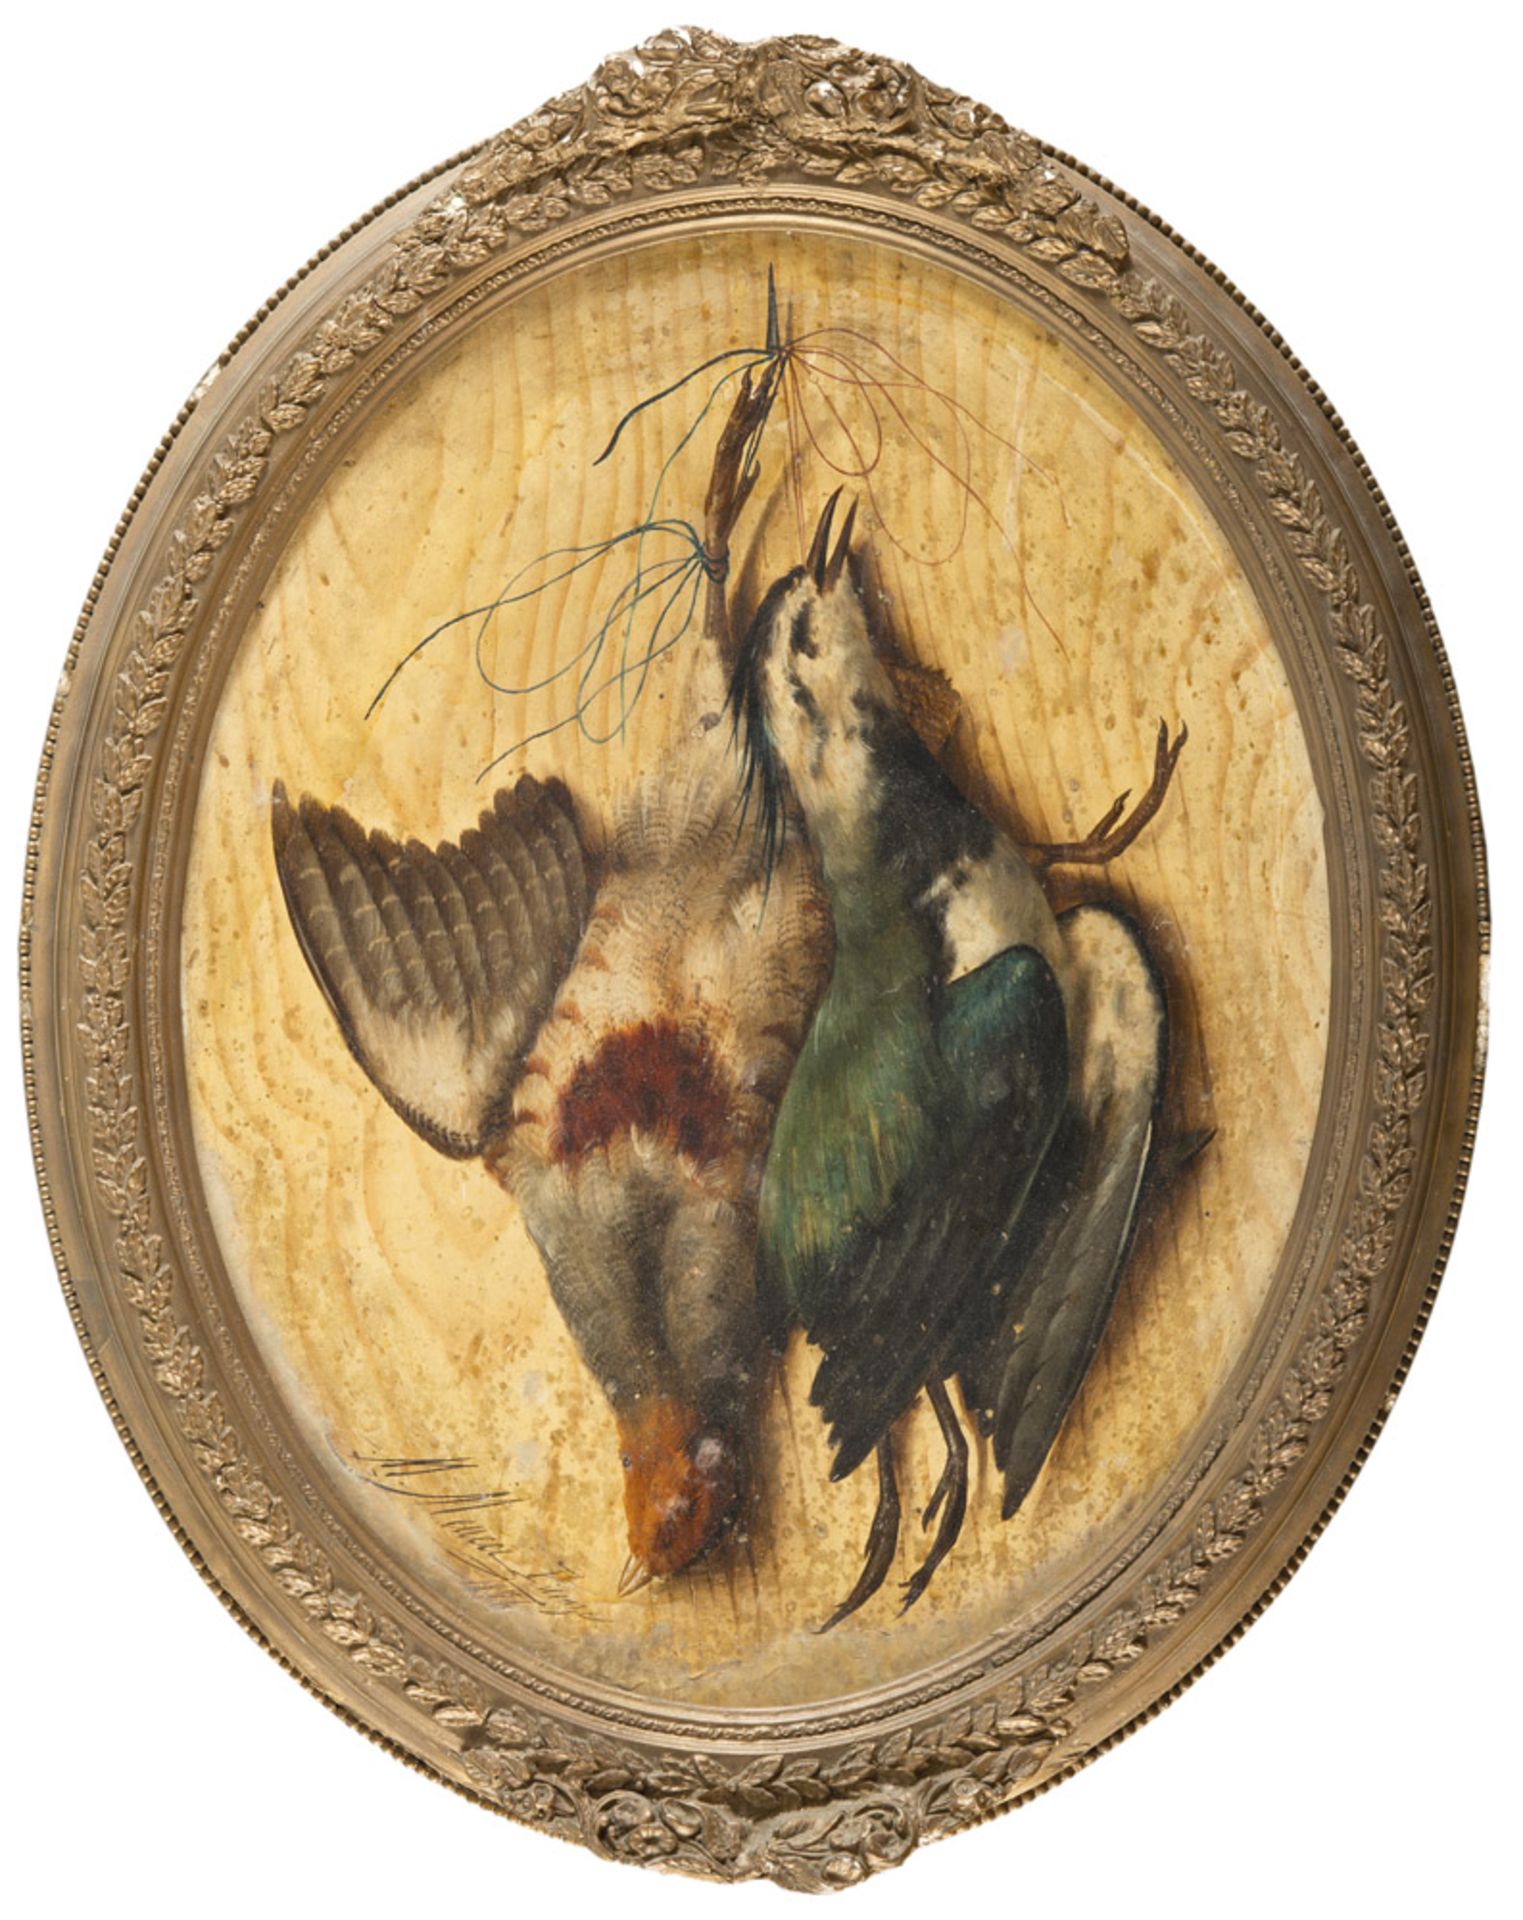 MICHELANGELO MEUCCI (Florence 1840 - 1905) Game Oval oil on panel, cm. 47 x 37 Signed and dated '